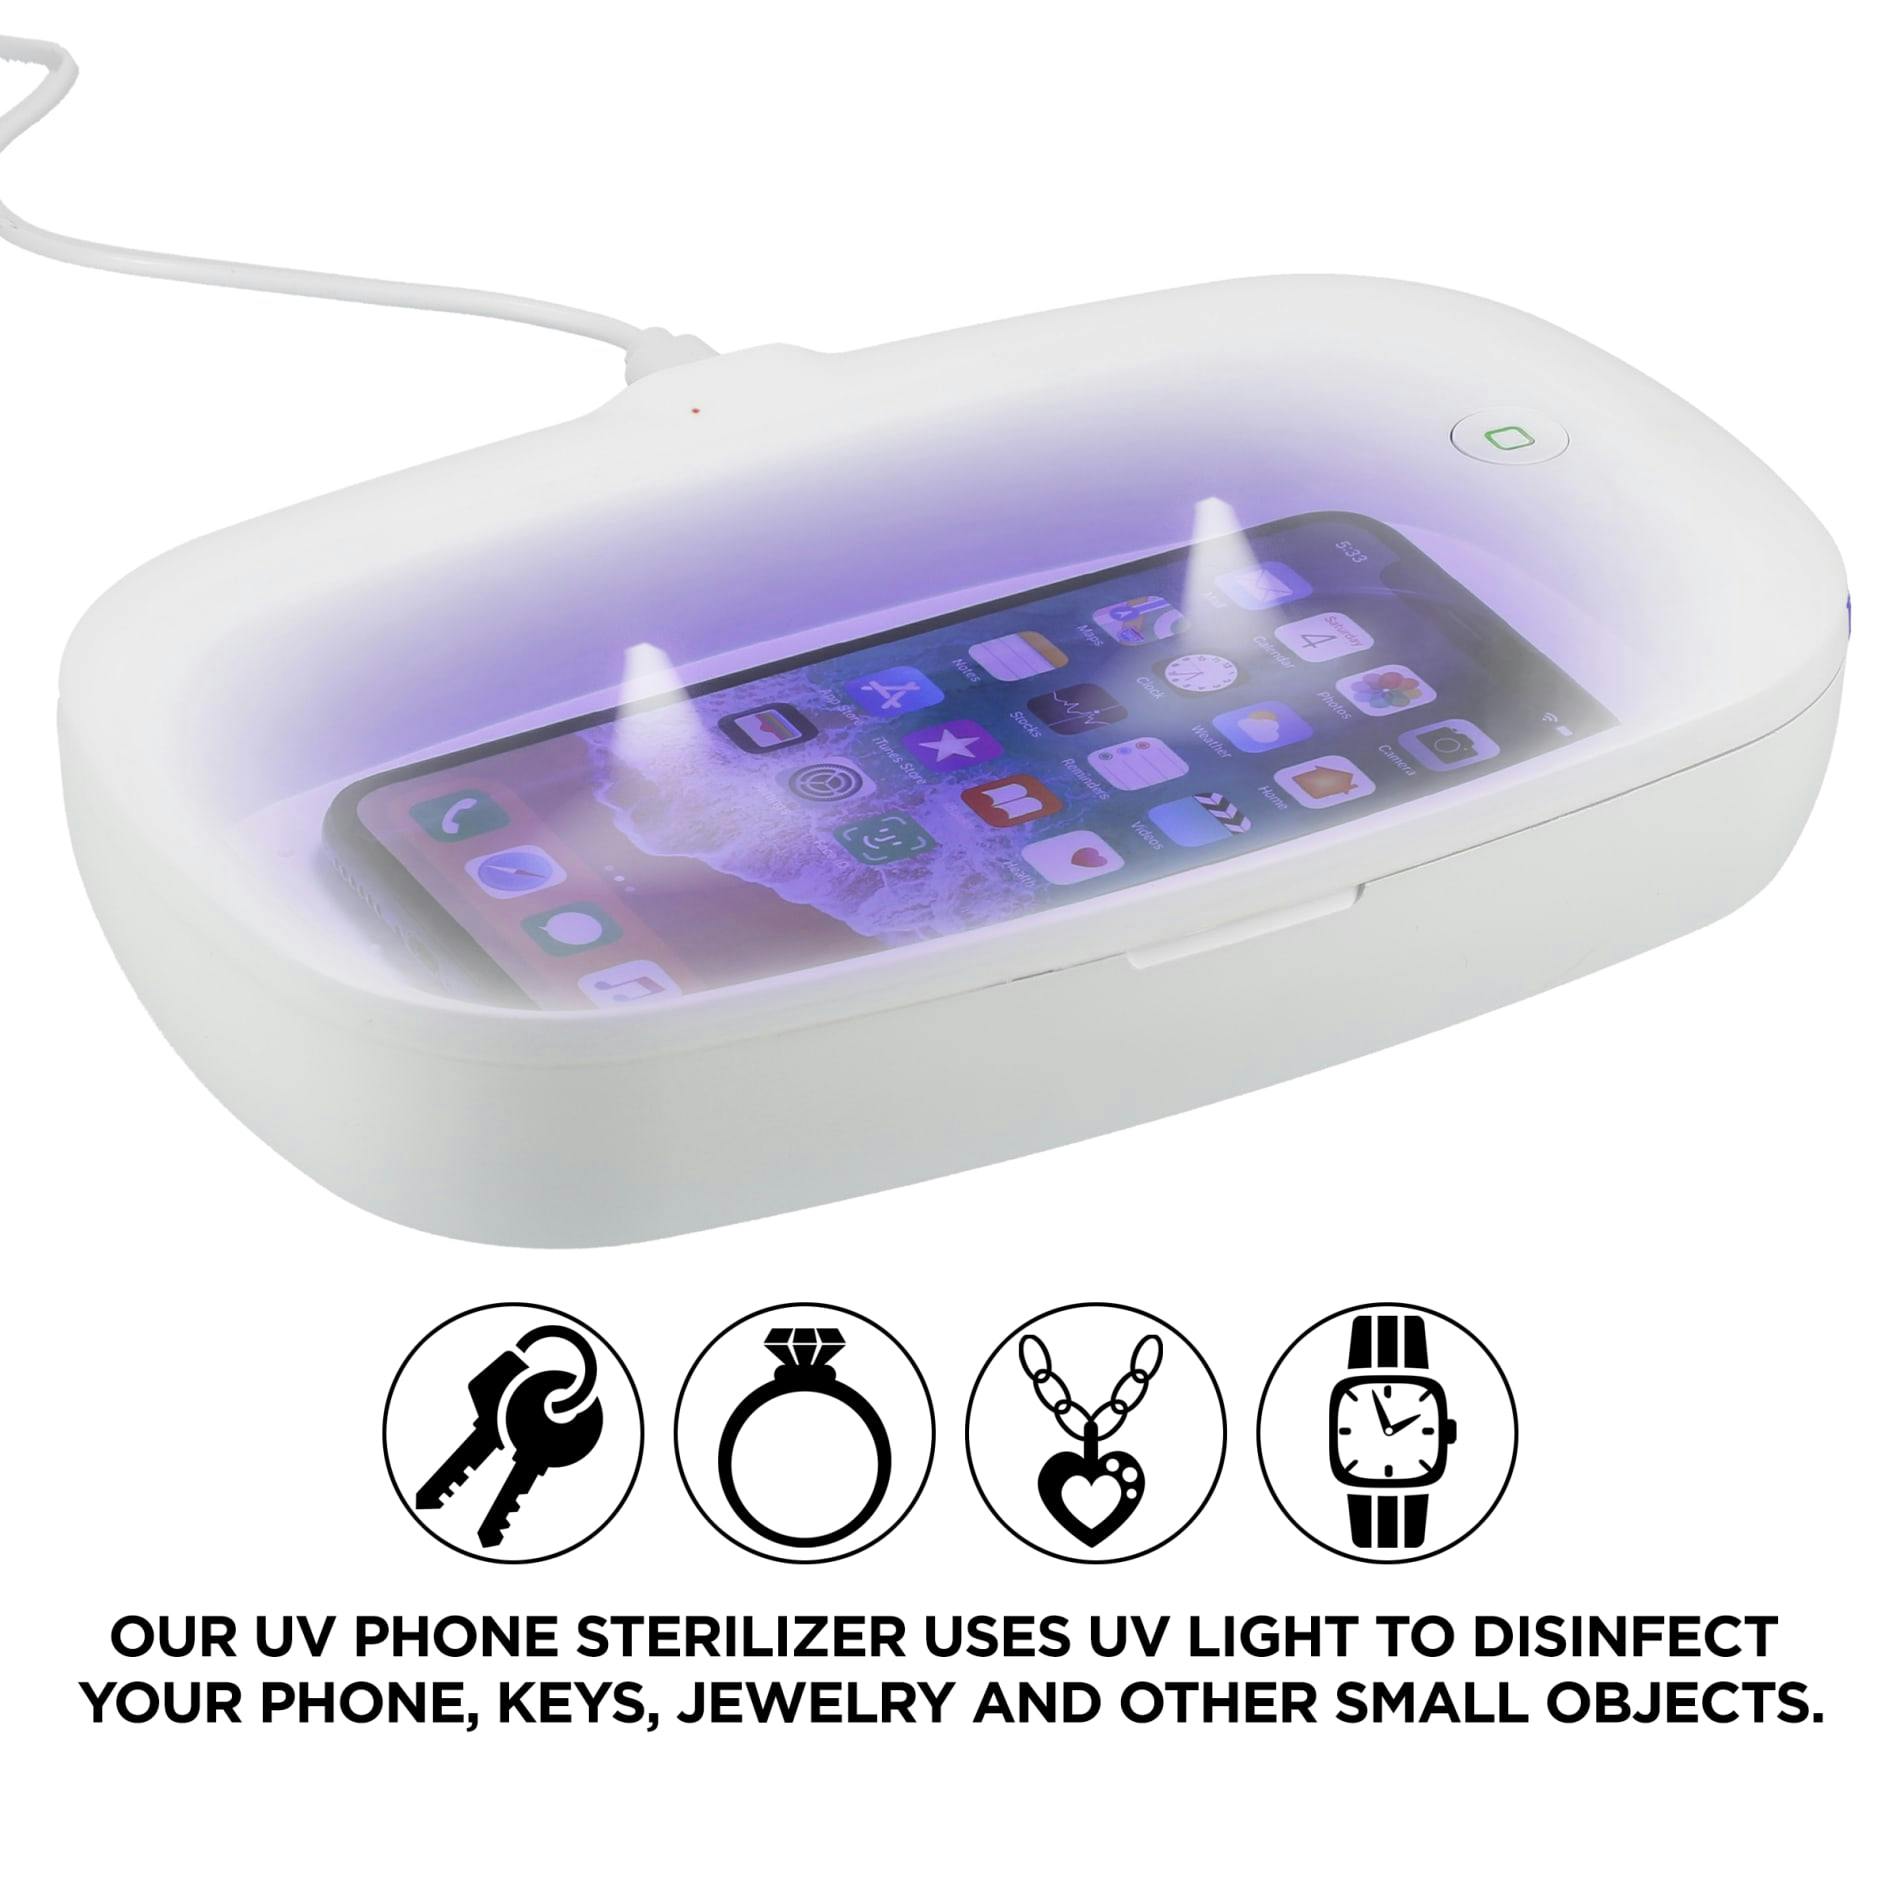 UV Phone Sanitizer with Wireless Charging Pad - additional Image 9